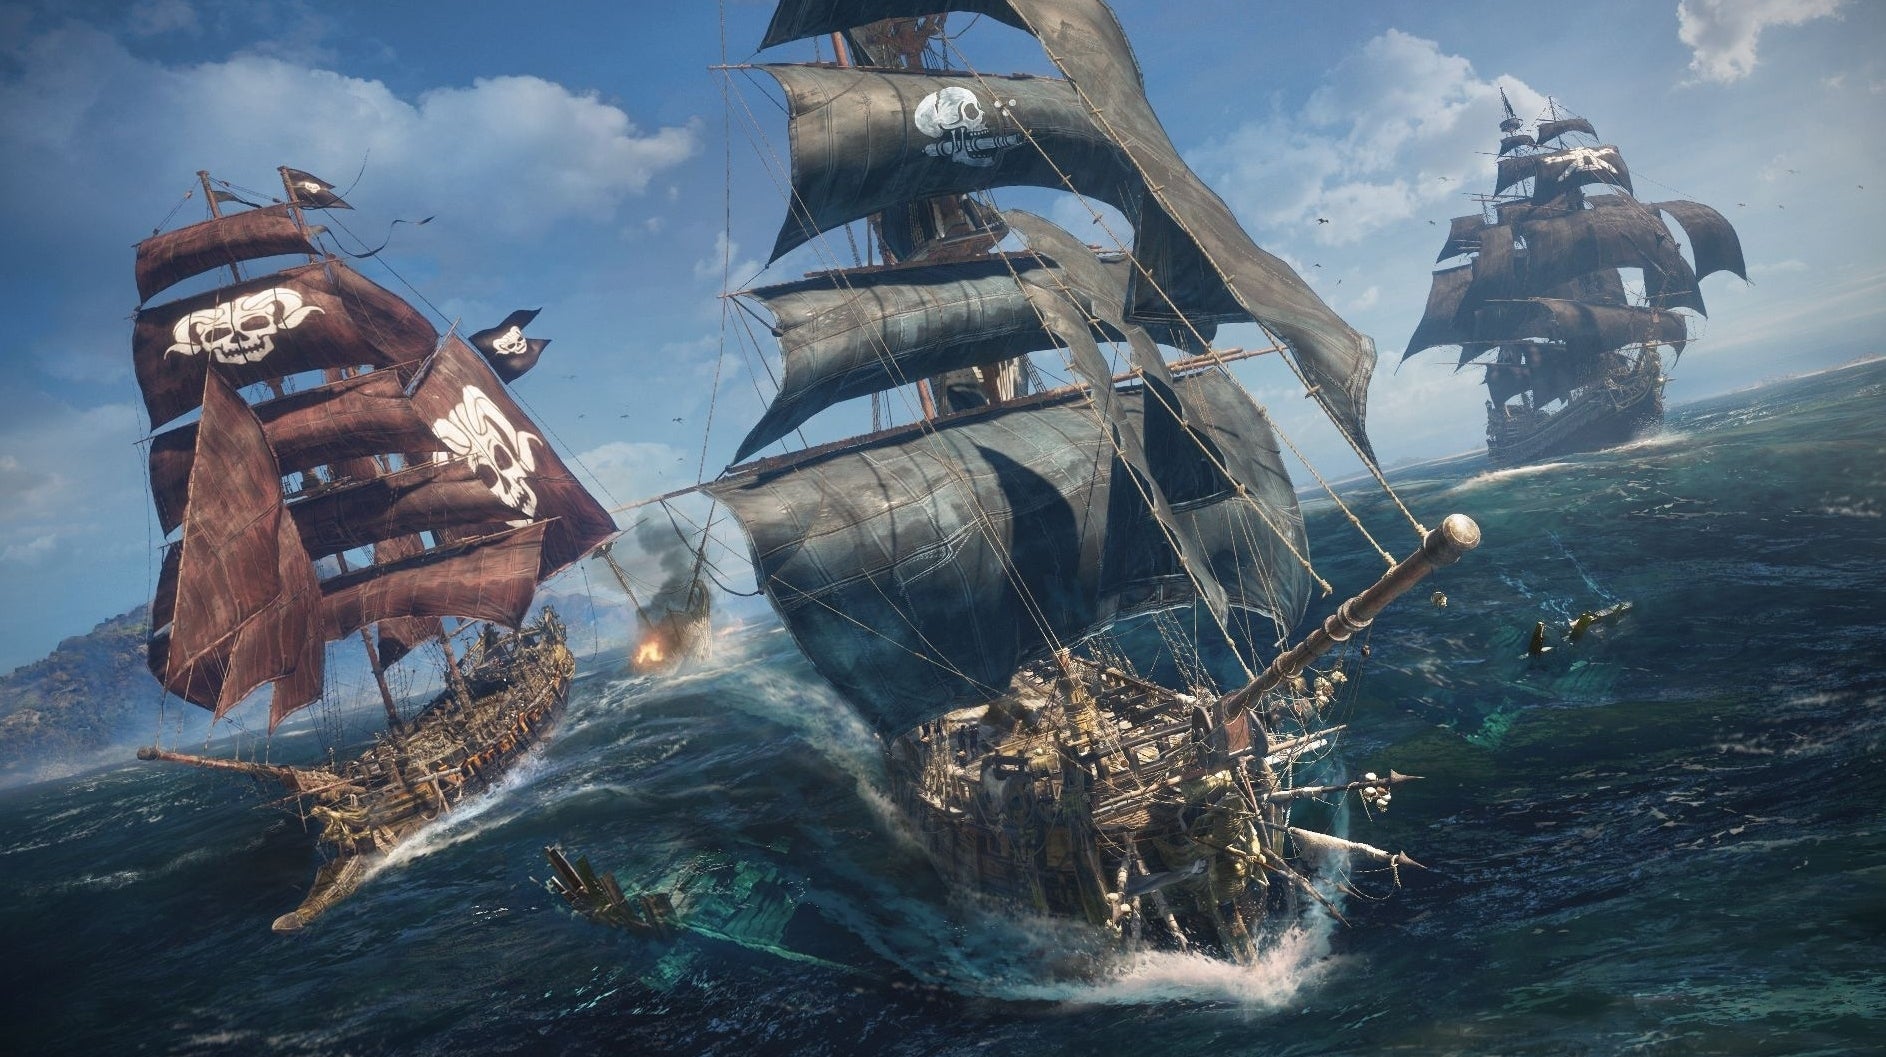 Image for Ubisoft's Skull & Bones is being reworked with live game elements